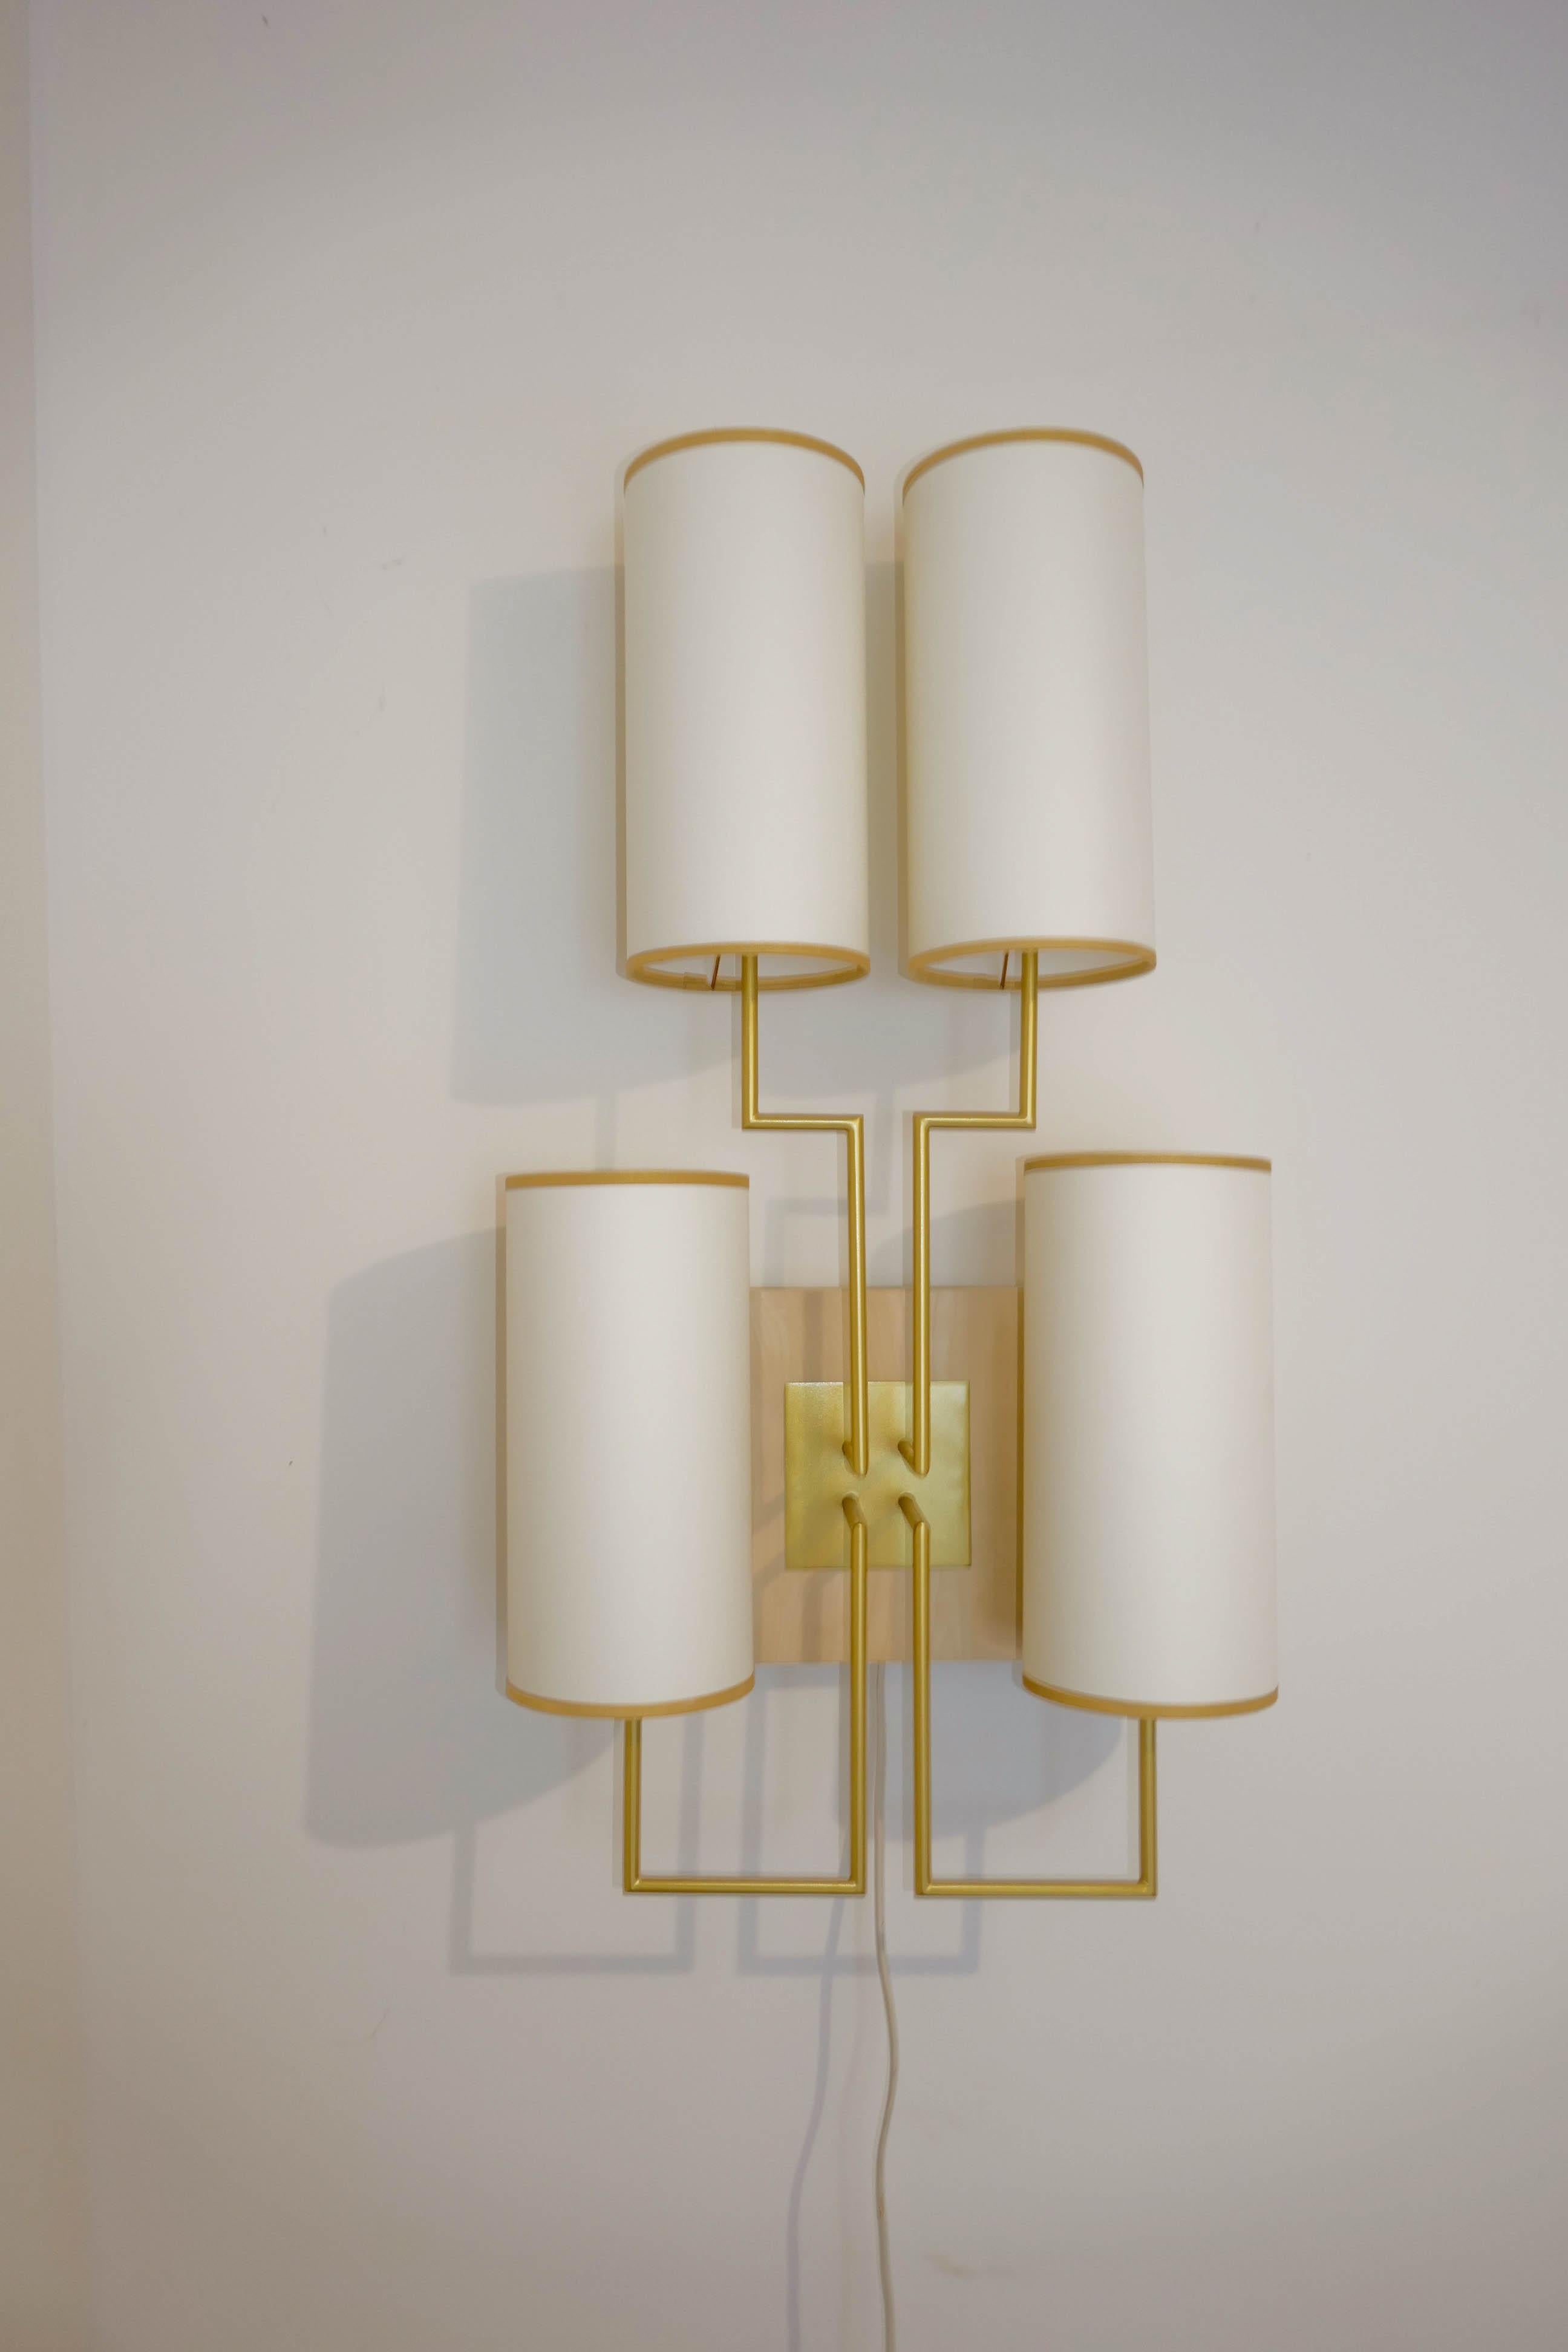 Wall lamp sconce in gold patina and white lamp shades, wooden baze in chestnut. Four lampshade in white fabric and golden braid.

Information about the covid 19.
At this point, the workshop has anticipated the crises and has all the material needed